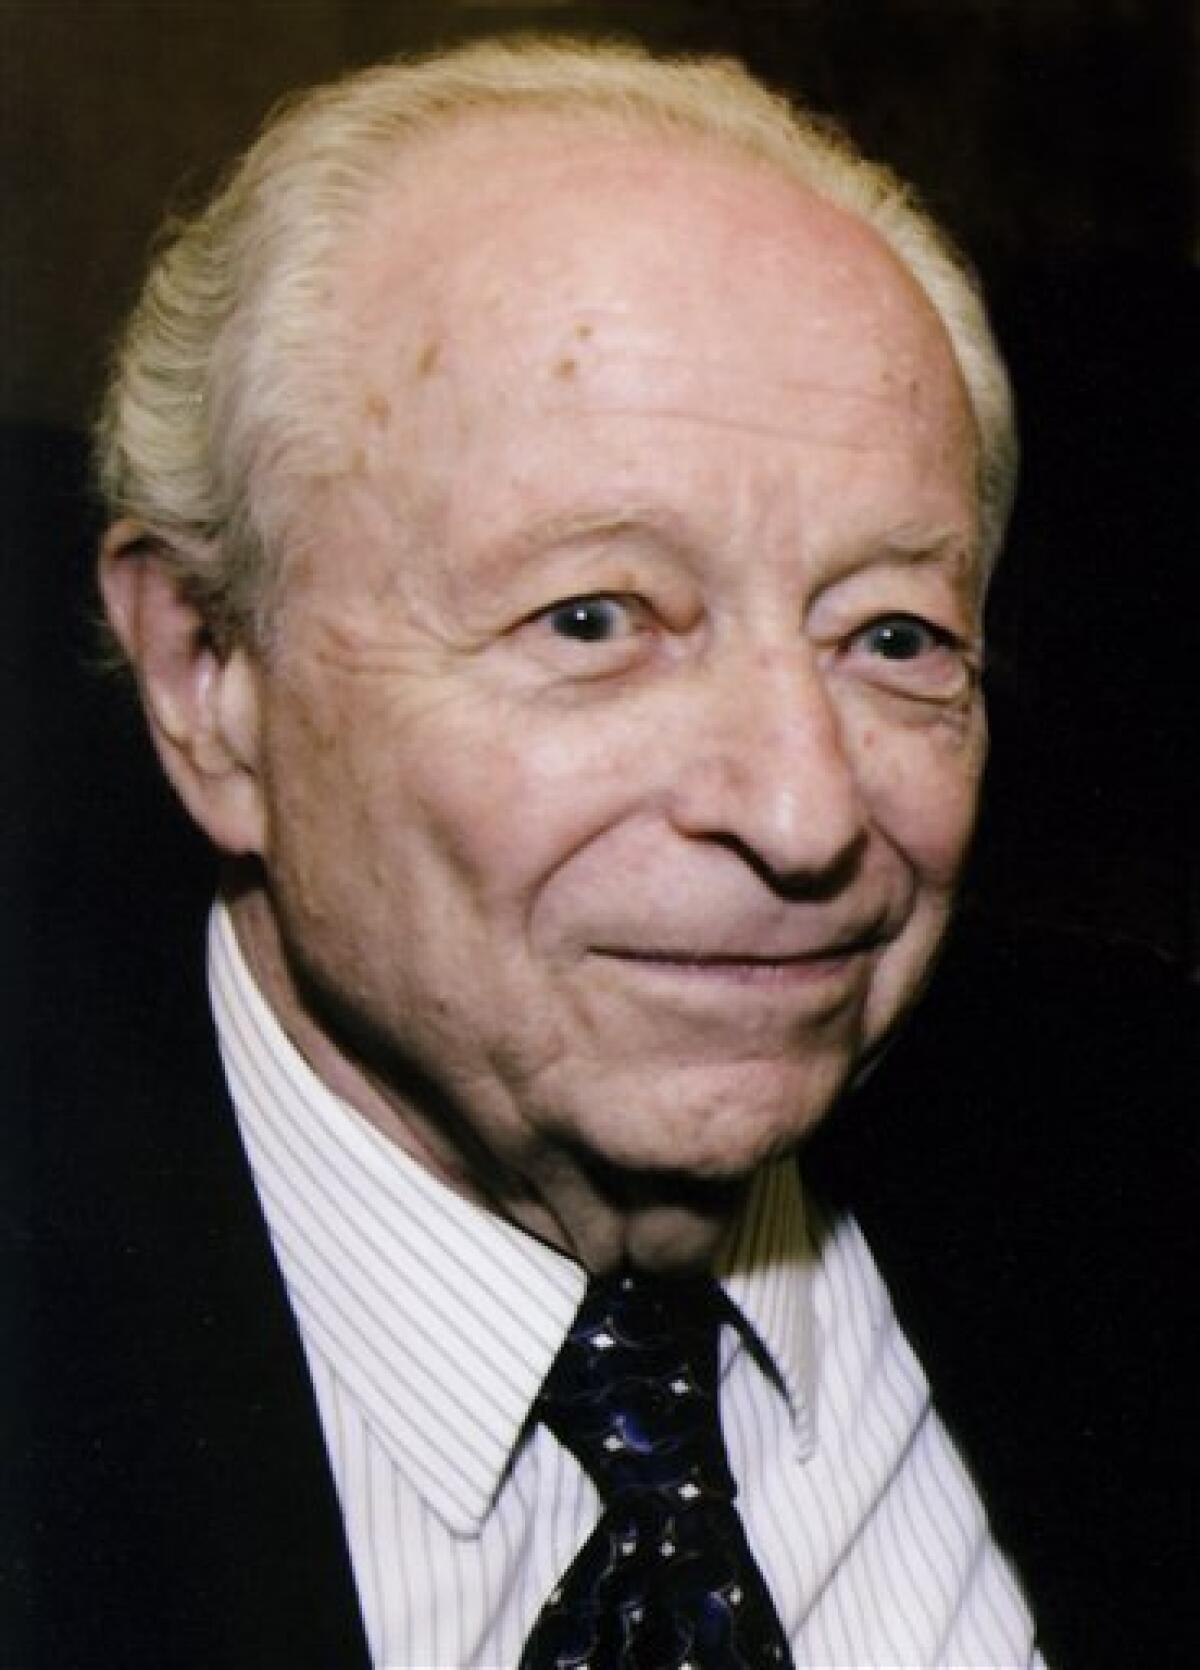 This undated photo provided by The Weekly Standard shows Irving Kristol, who died Friday, September 18, 2009. He Was 89. (AP Photo/The Weekly Standard)